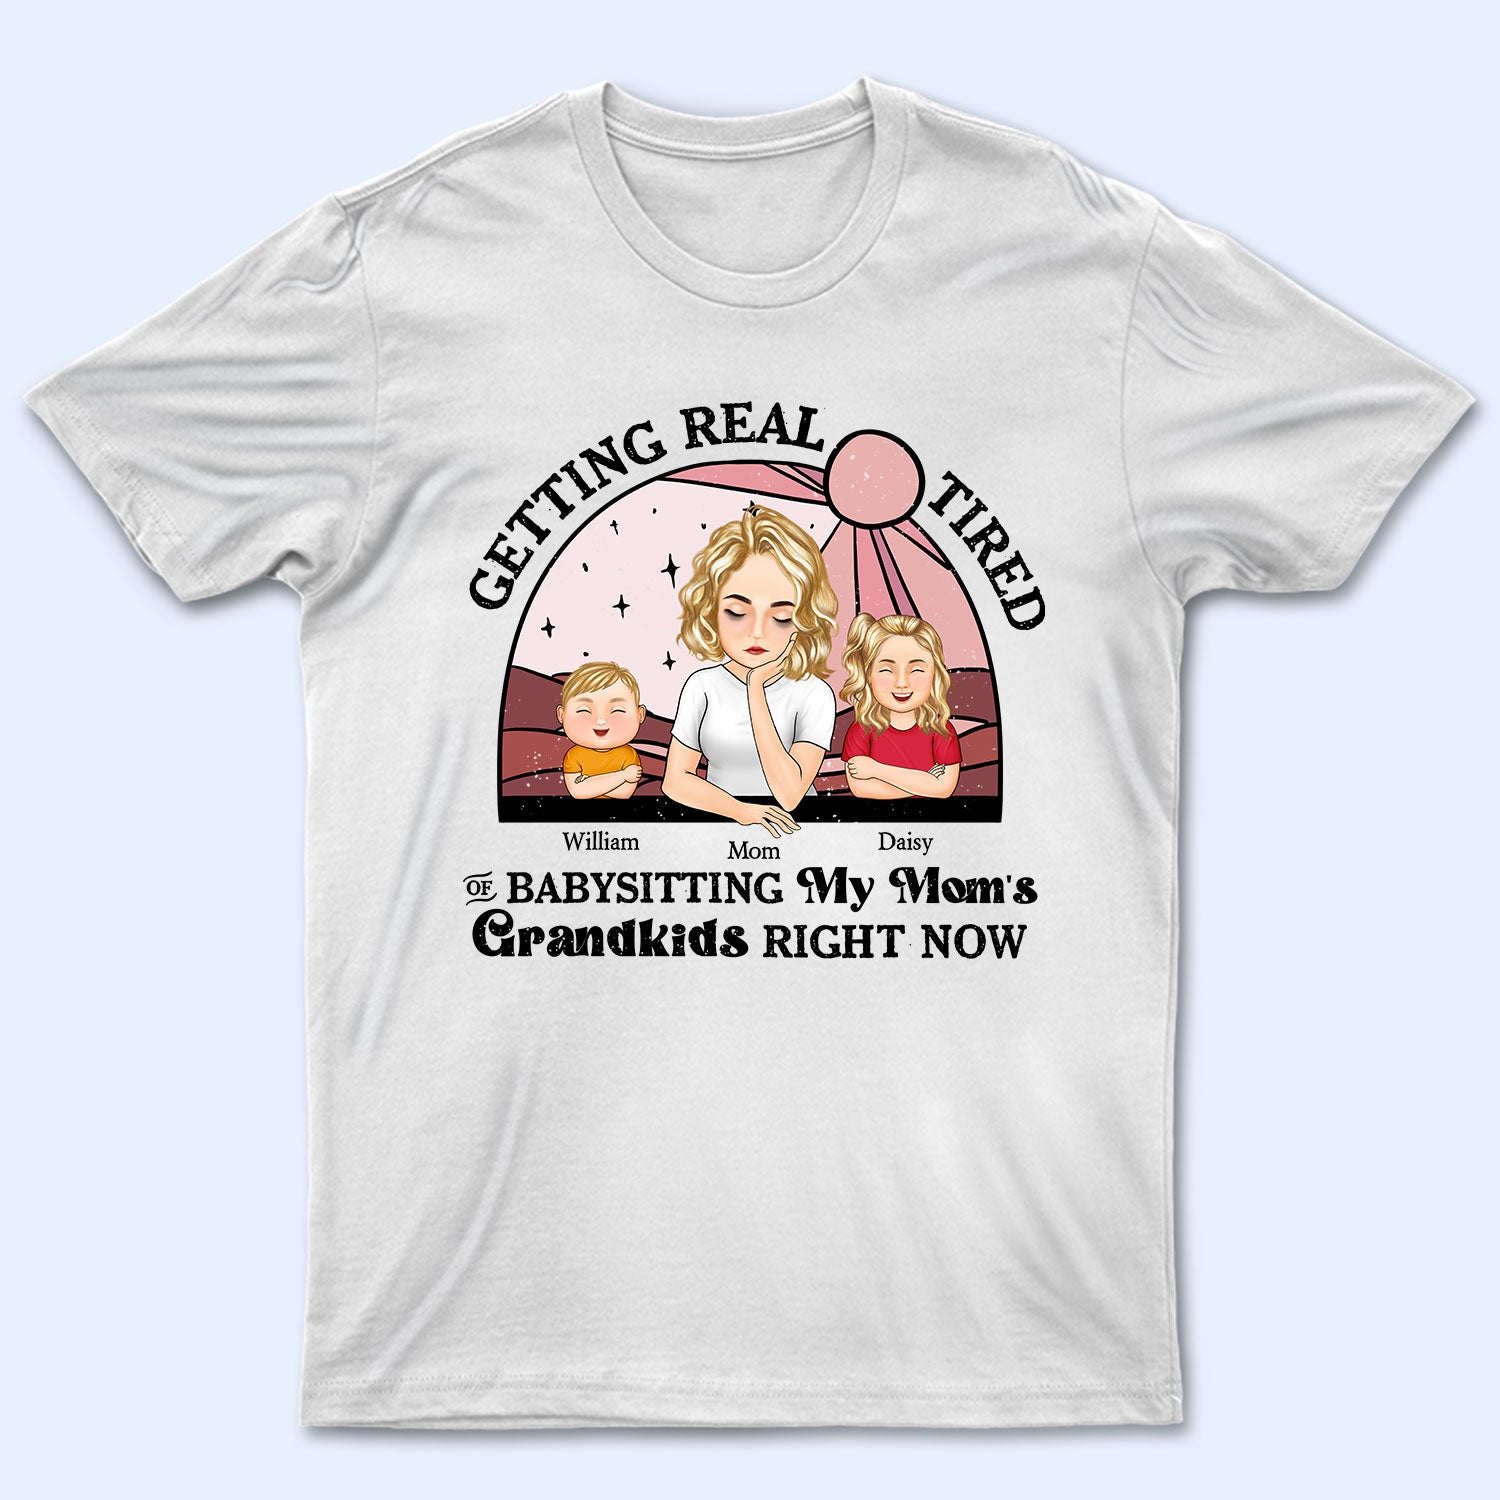 My Mom's Grandkids - Gift For Mom And Aunt - Personalized T Shirt